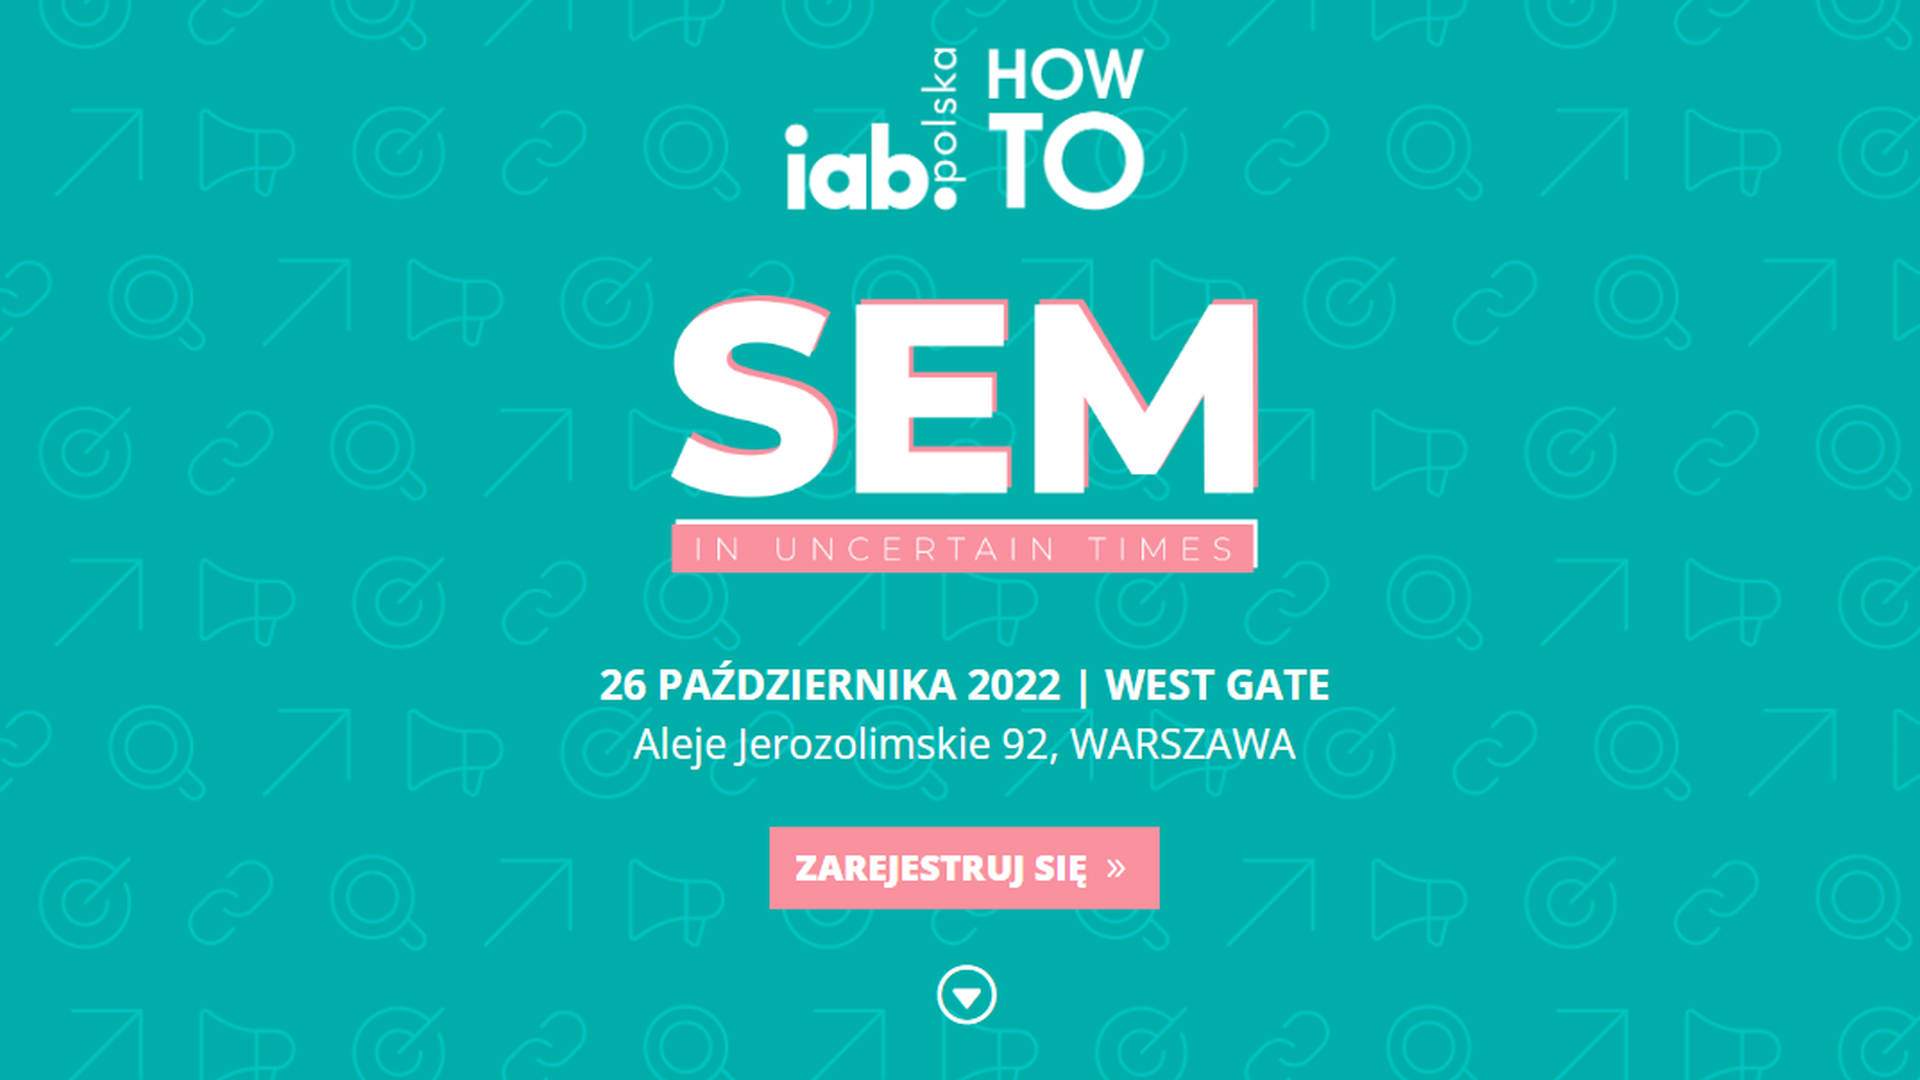 IAB HowTo SEM in uncertain times